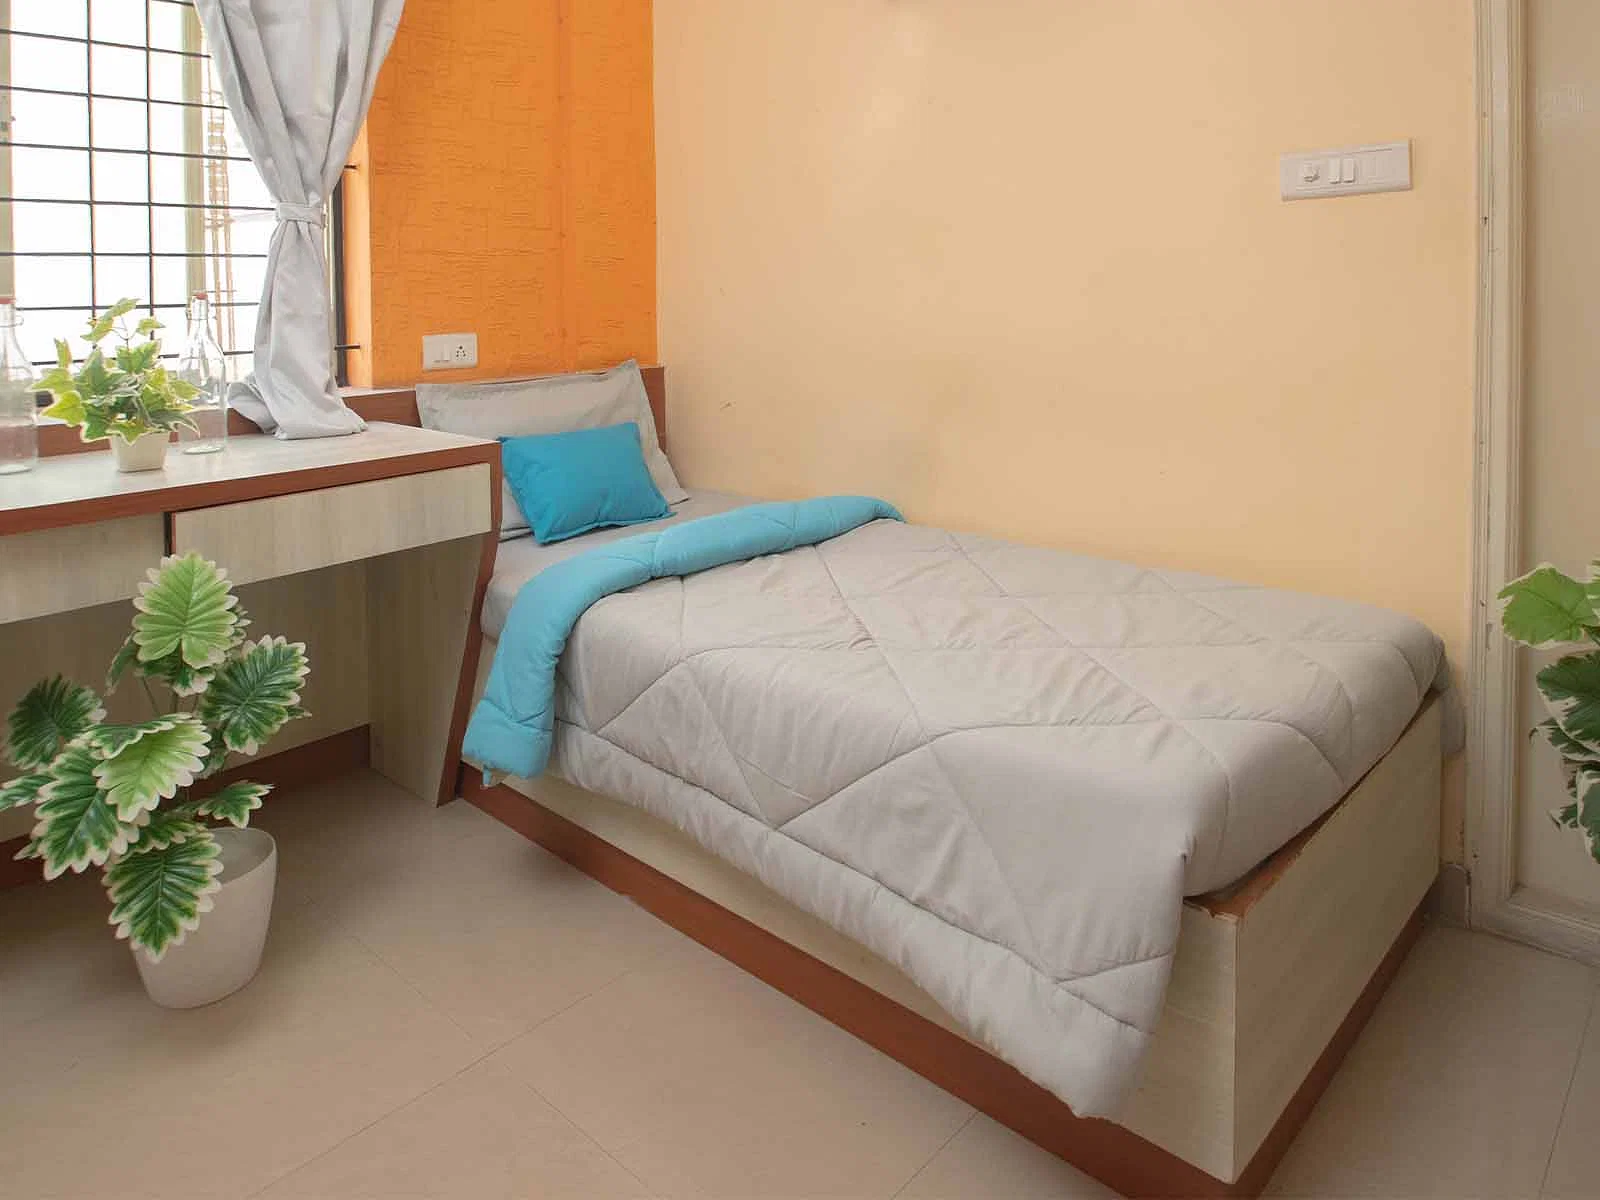 best men and women PGs in prime locations of Bangalore with all amenities-book now-Zolo Heaven C